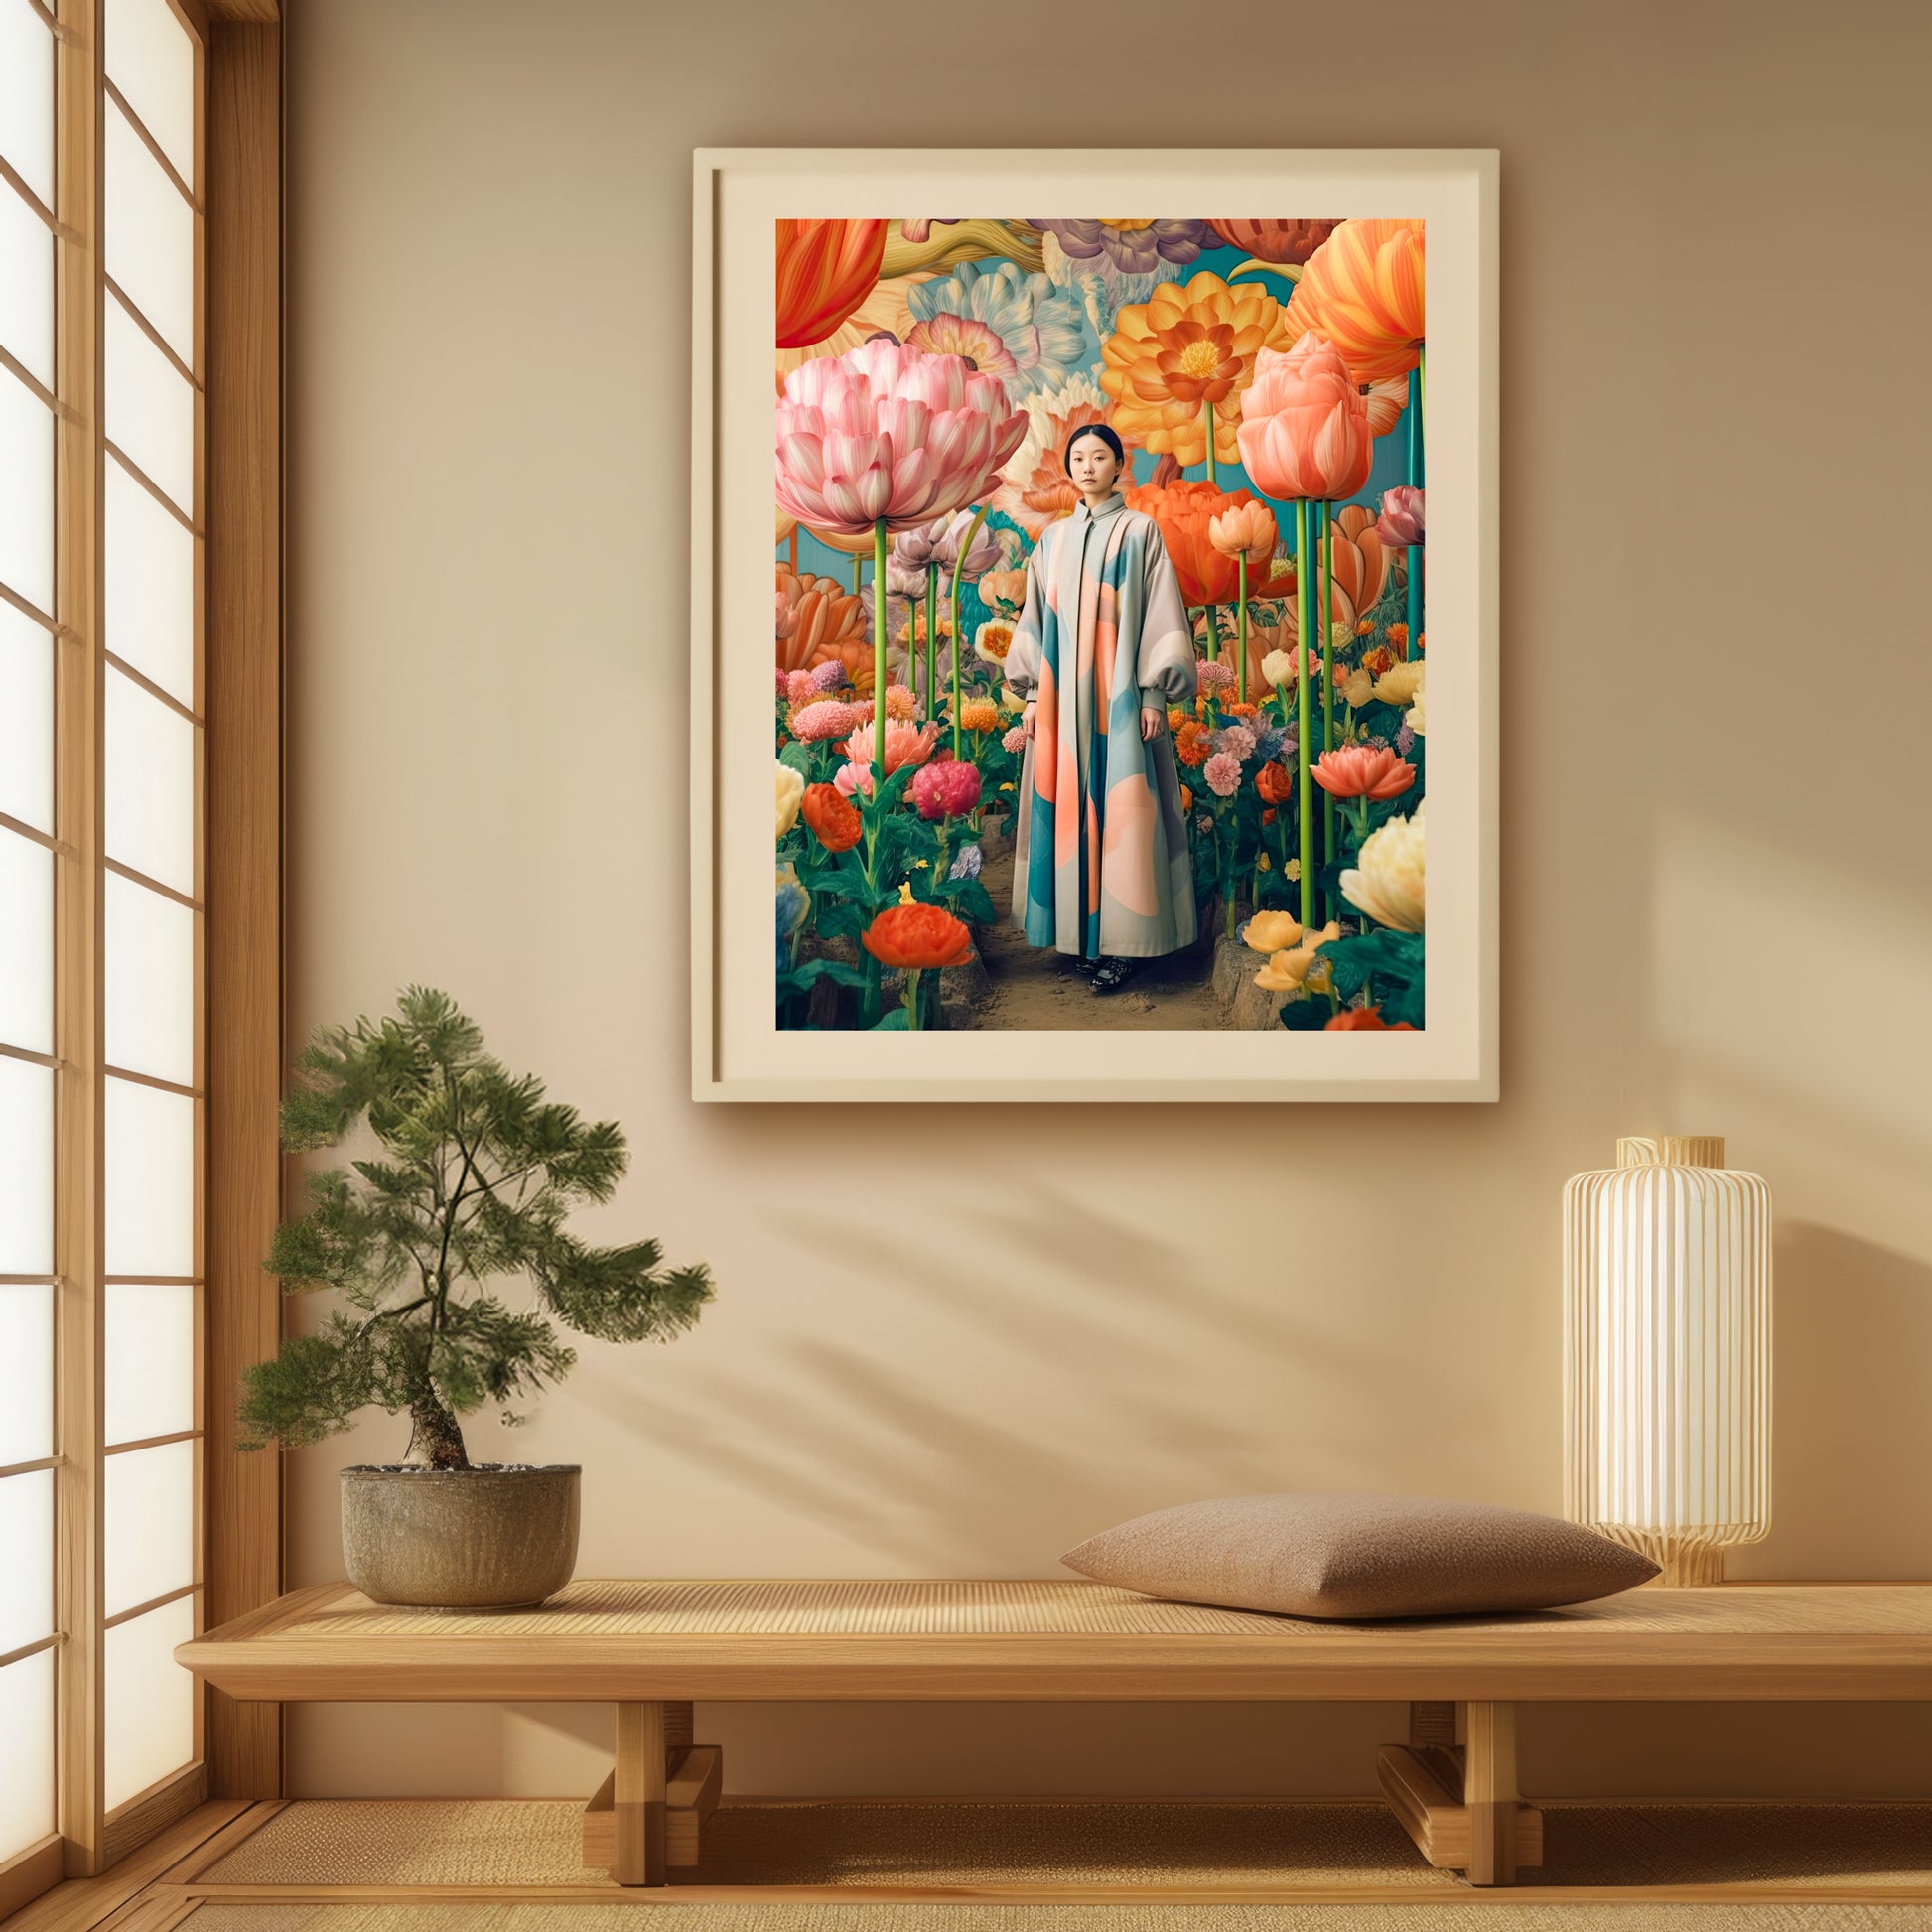 Art print showcasing a woman in a garden filled with oversized, colorful flowers, creating a whimsical and enchanting scene. This fine art print captures a timeless, magical moment.